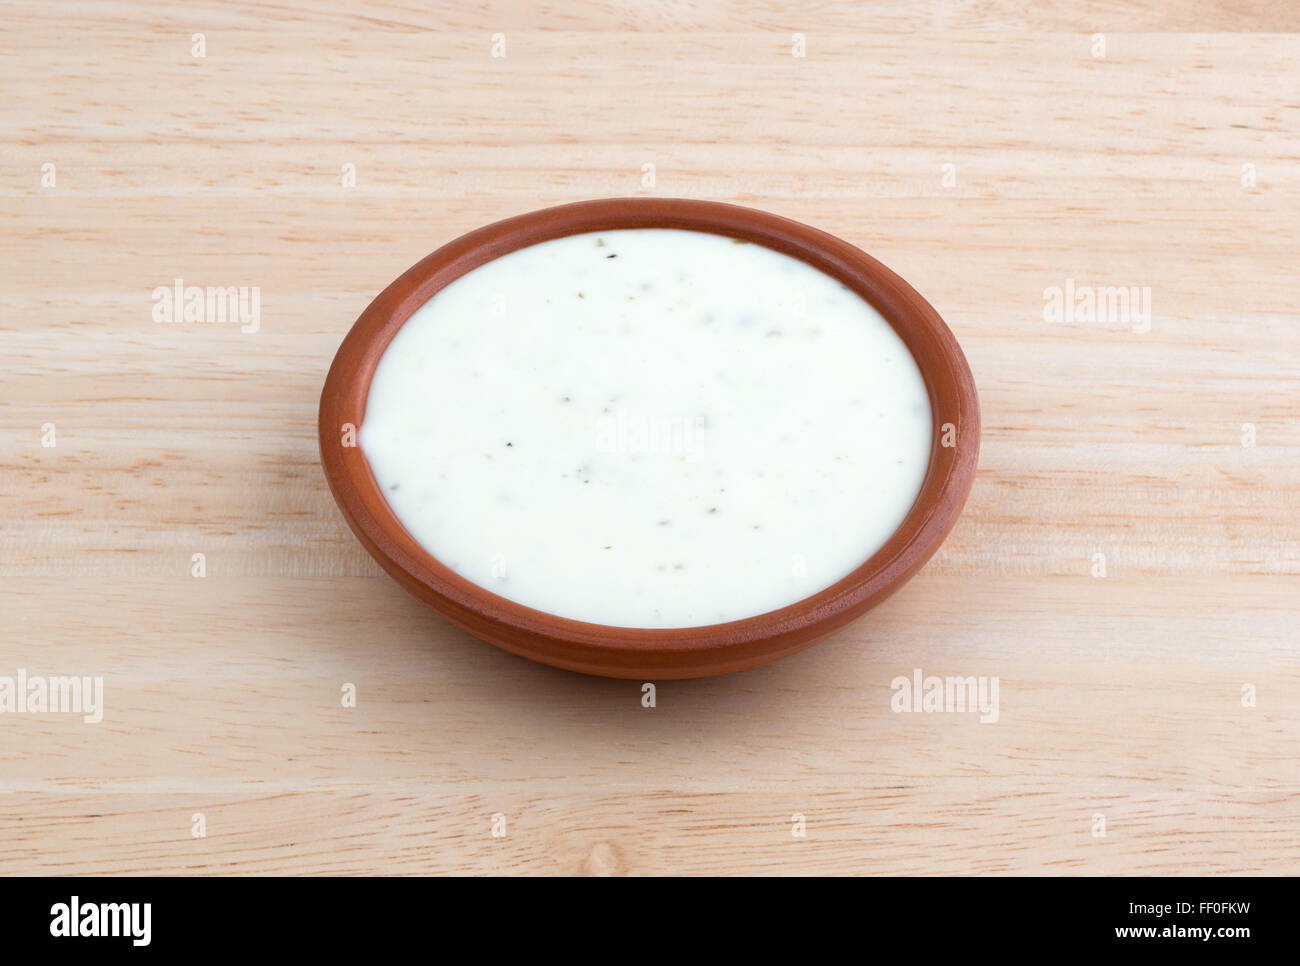 Hidden valley ranch dressing hi-res stock photography and images - Alamy